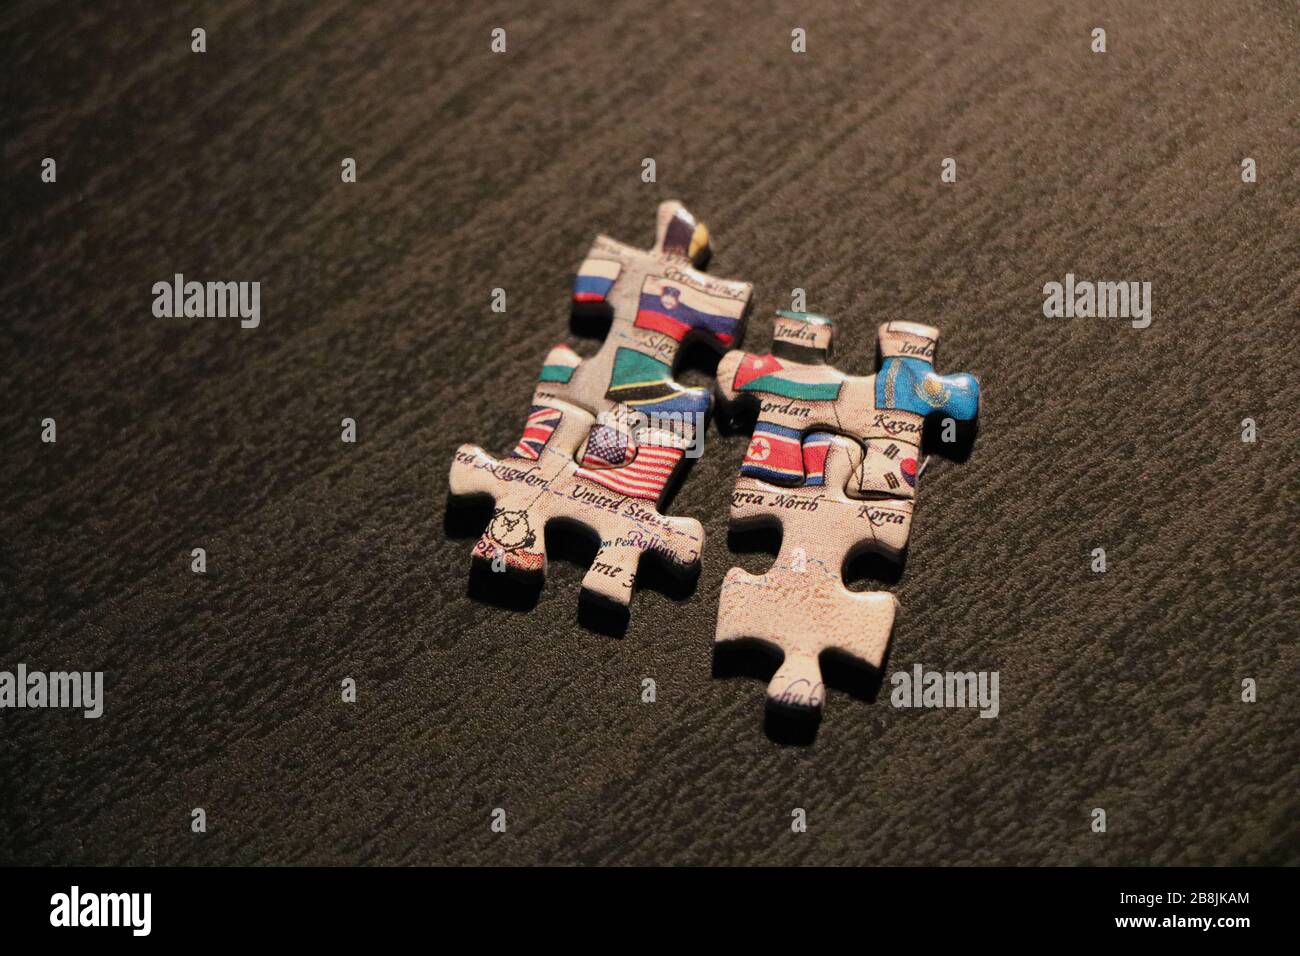 Puzzle pieces that do not fit containing flags of United States and North Korea against dark background. Stock Photo